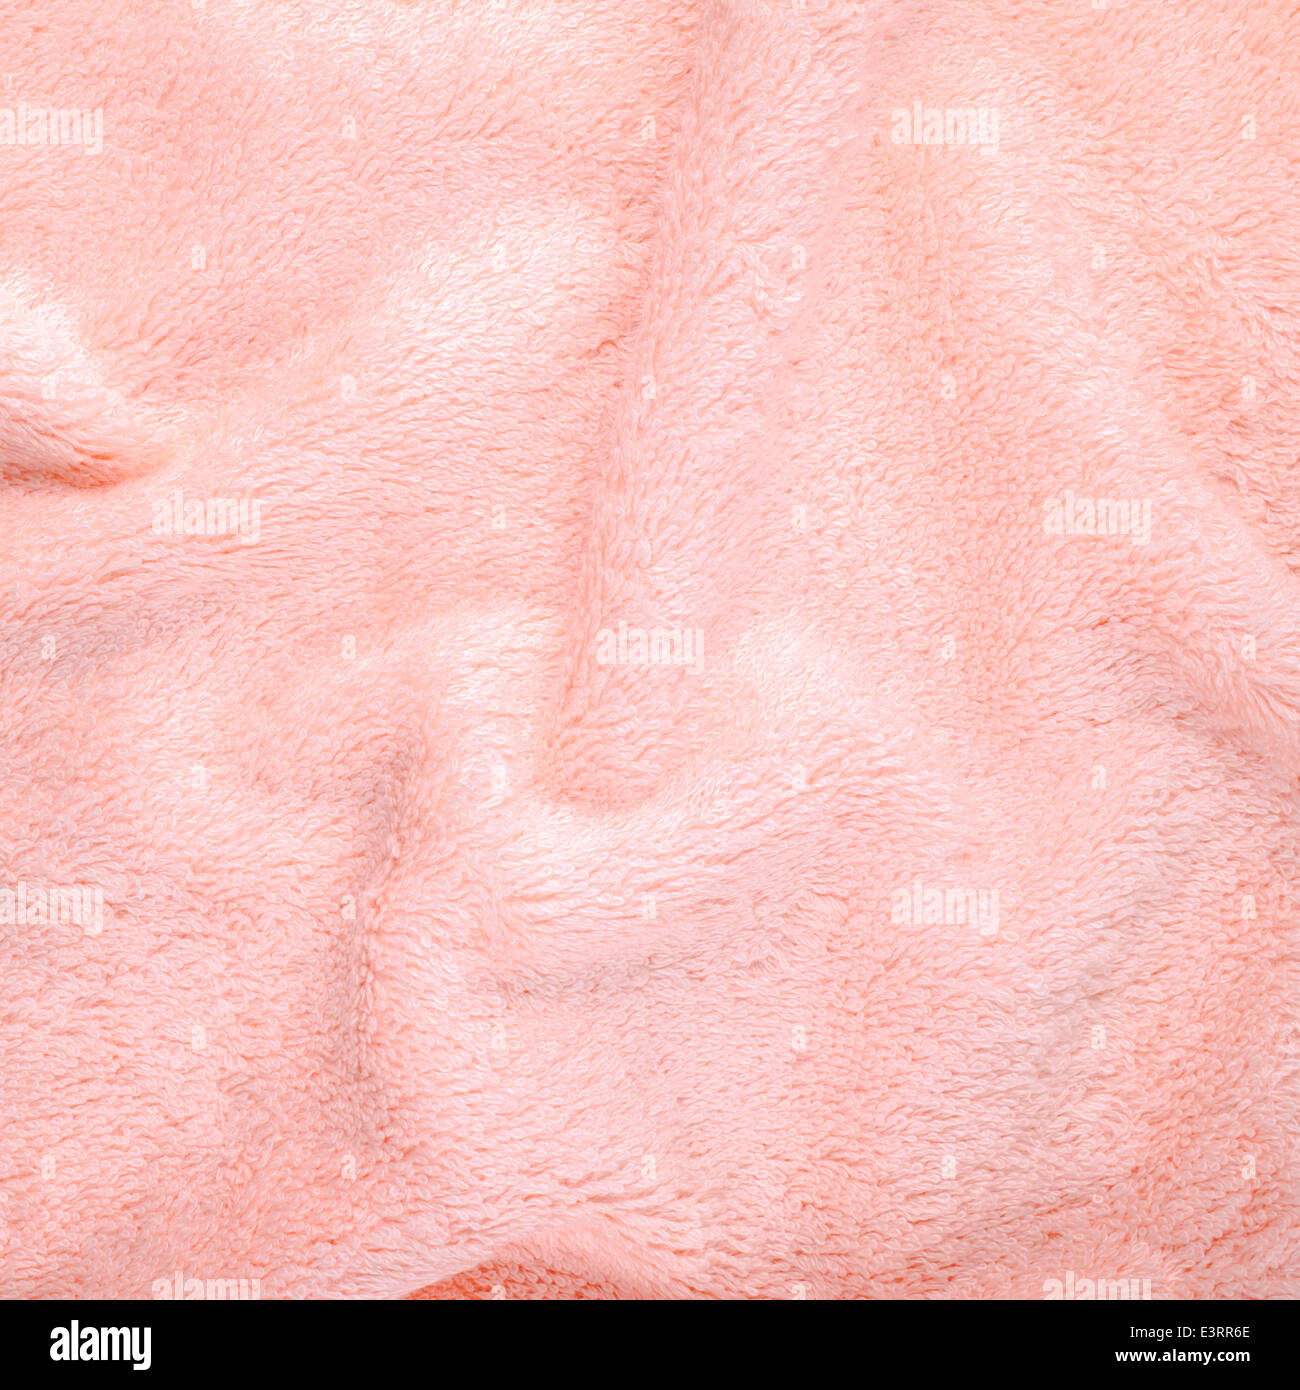 pink texture of bath towel folded as a background Stock Photo